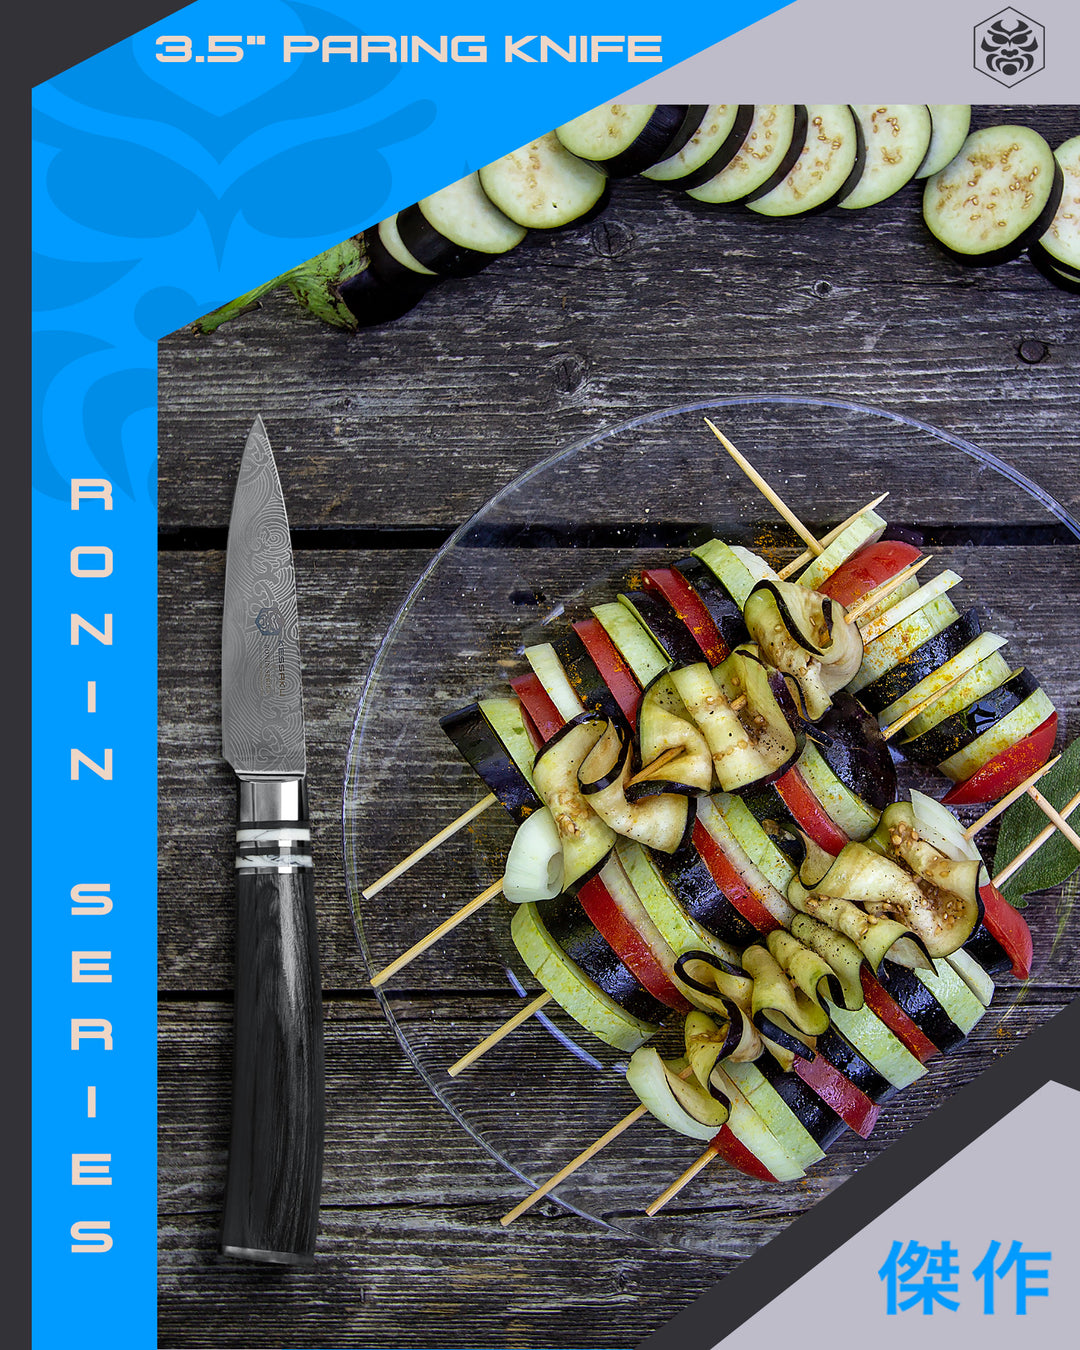 The Ronin Paring Knife and skewers of thinly sliced vegetables